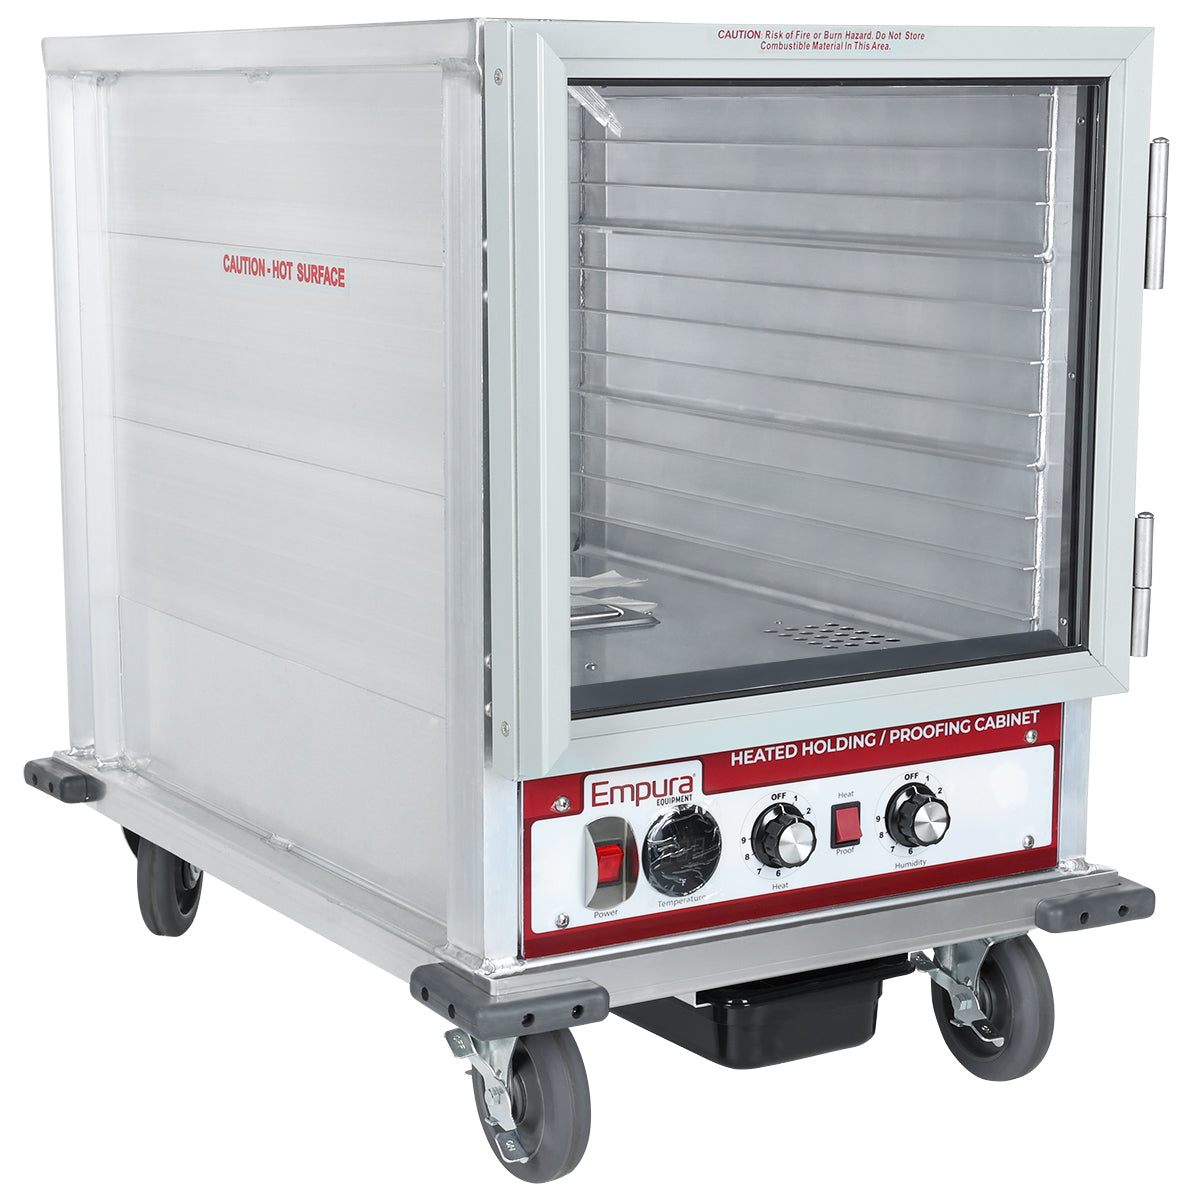 Empura E-HP1812 Half-Height Non-Insulated Mobile Heavy-Duty Anodized Aluminum Heated Proofer And Holding Cabinet With 1 Clear Polycarbonate Door